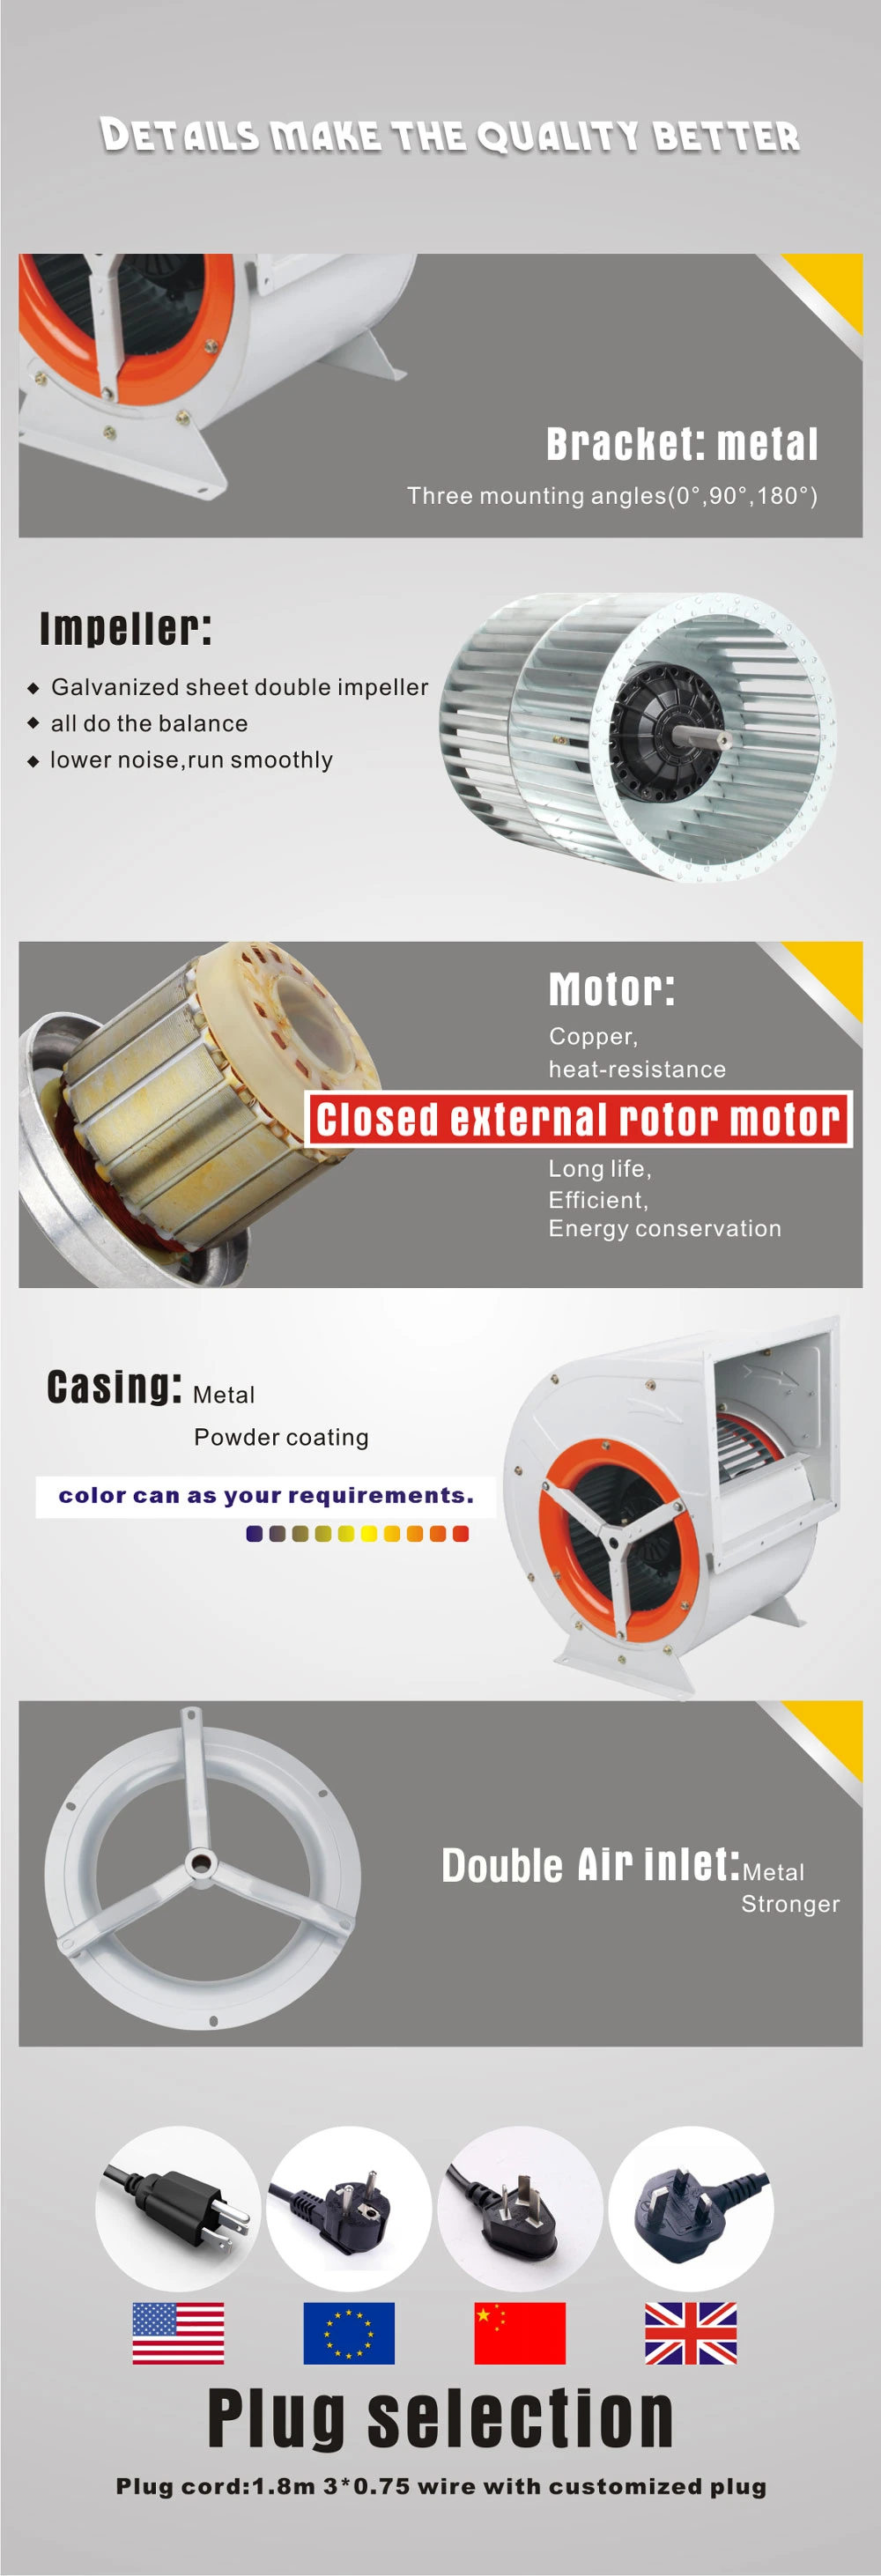 1.5kw 5500CMH Double Inlet DC Air Curtain Centrifugal Fan Blower for Air Ventilation